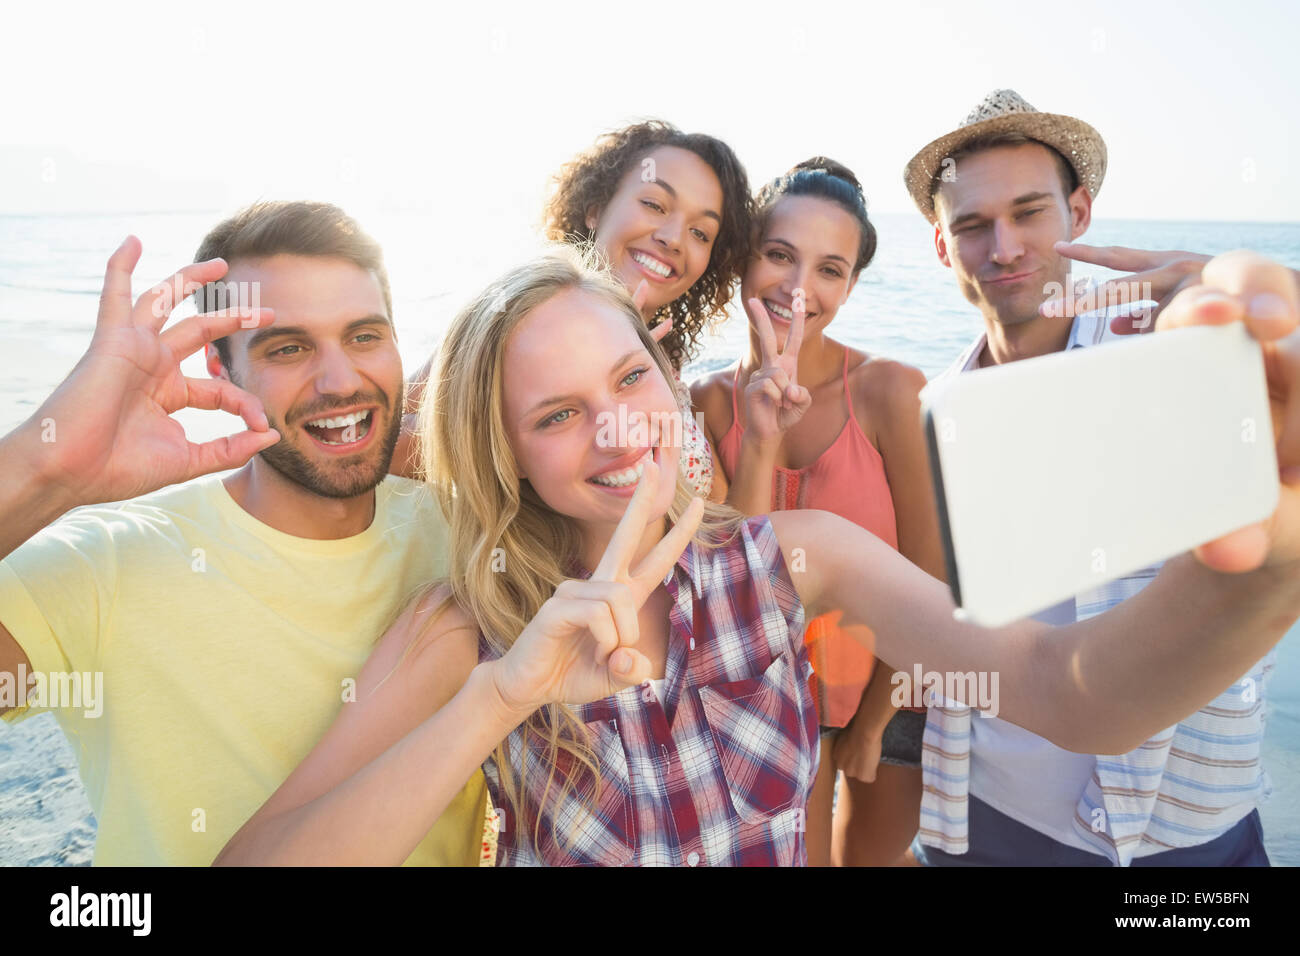 group of friends taking selfies Stock Photo